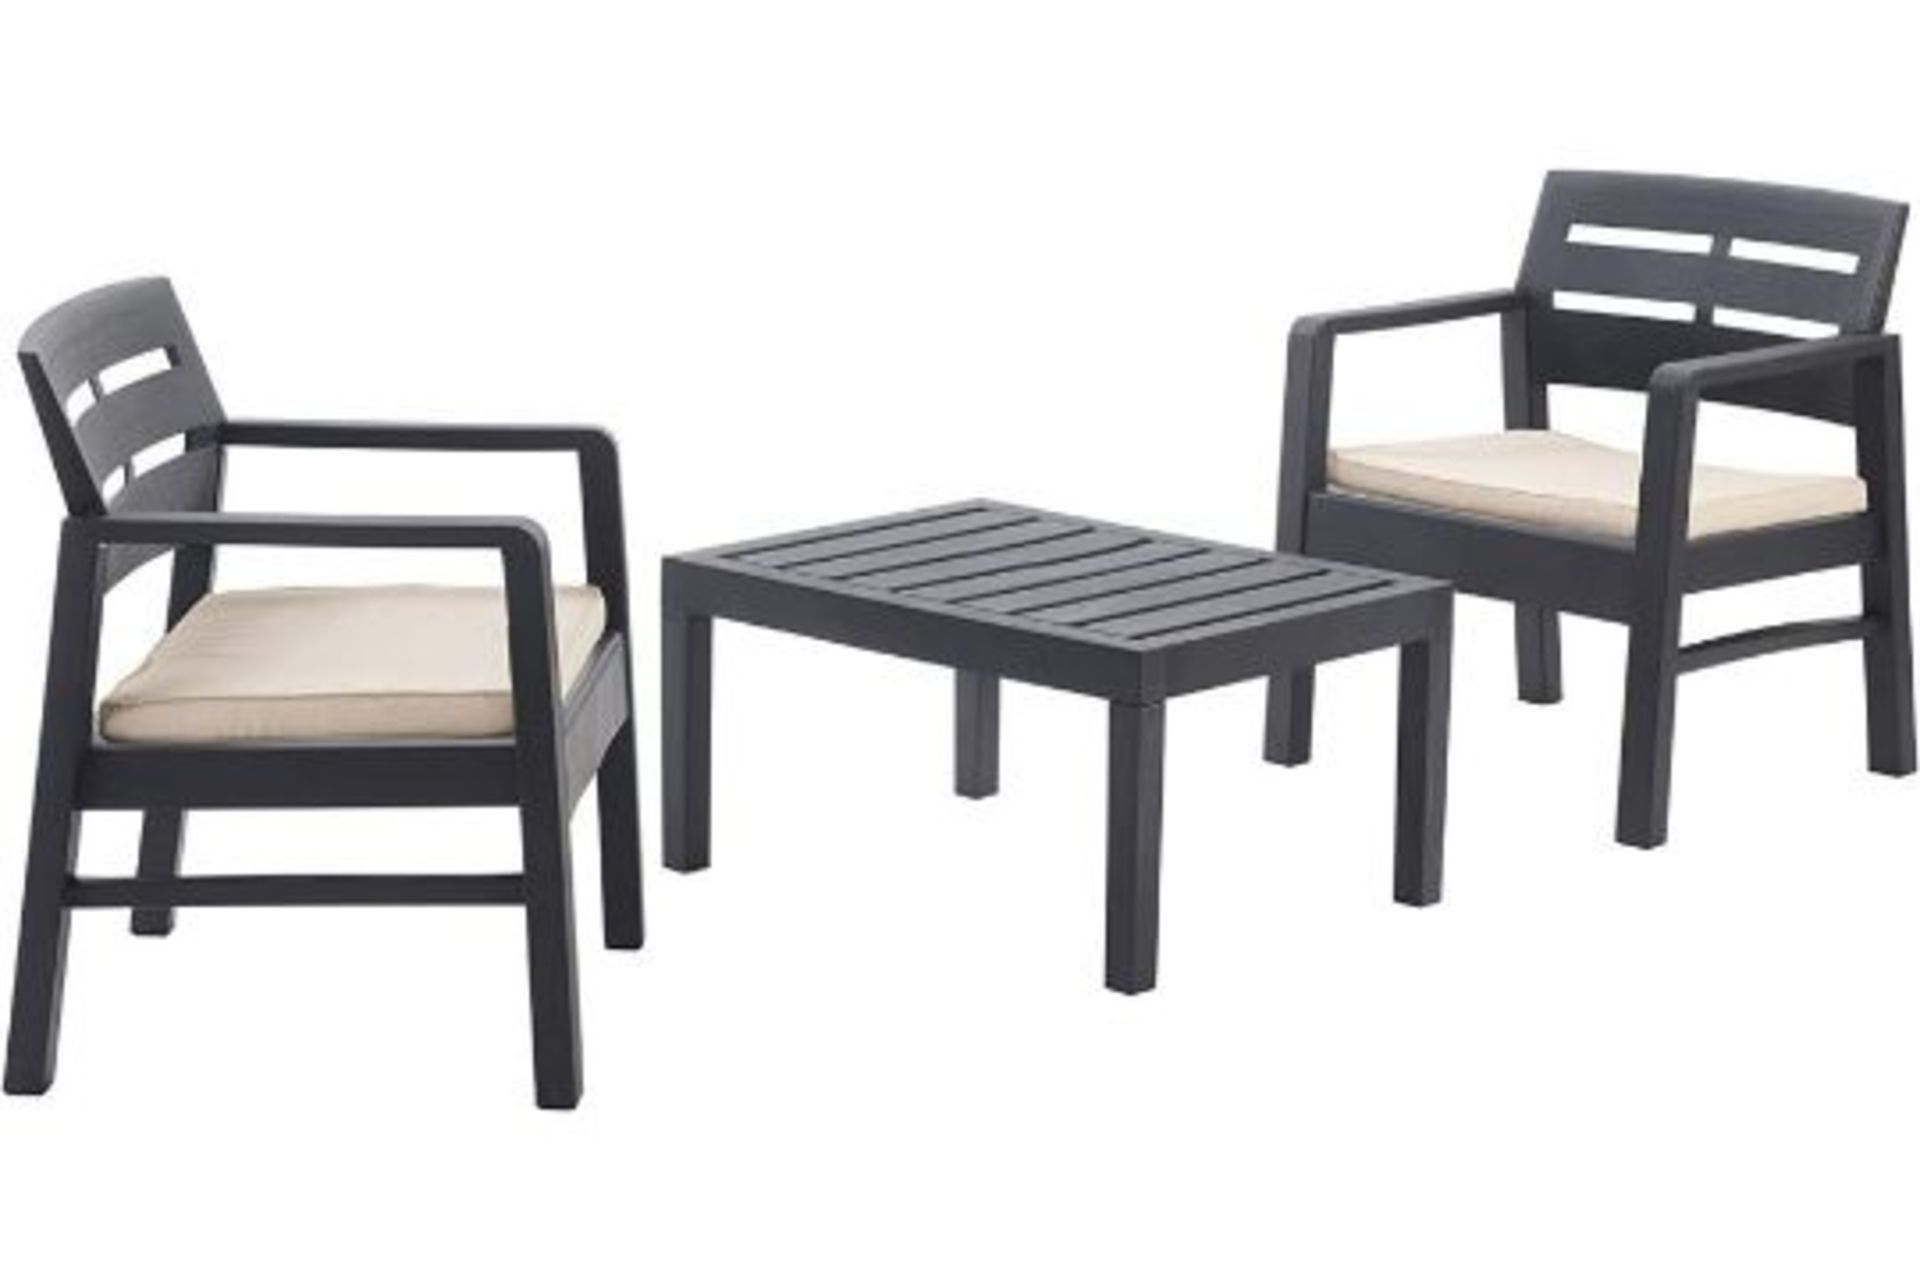 IPAE WOOD GRAIN EFFECT GARDEN FURNITURE SET WITH TABLE AND 2 LARGE ARM CHAIRS PATIO SET RRP £149